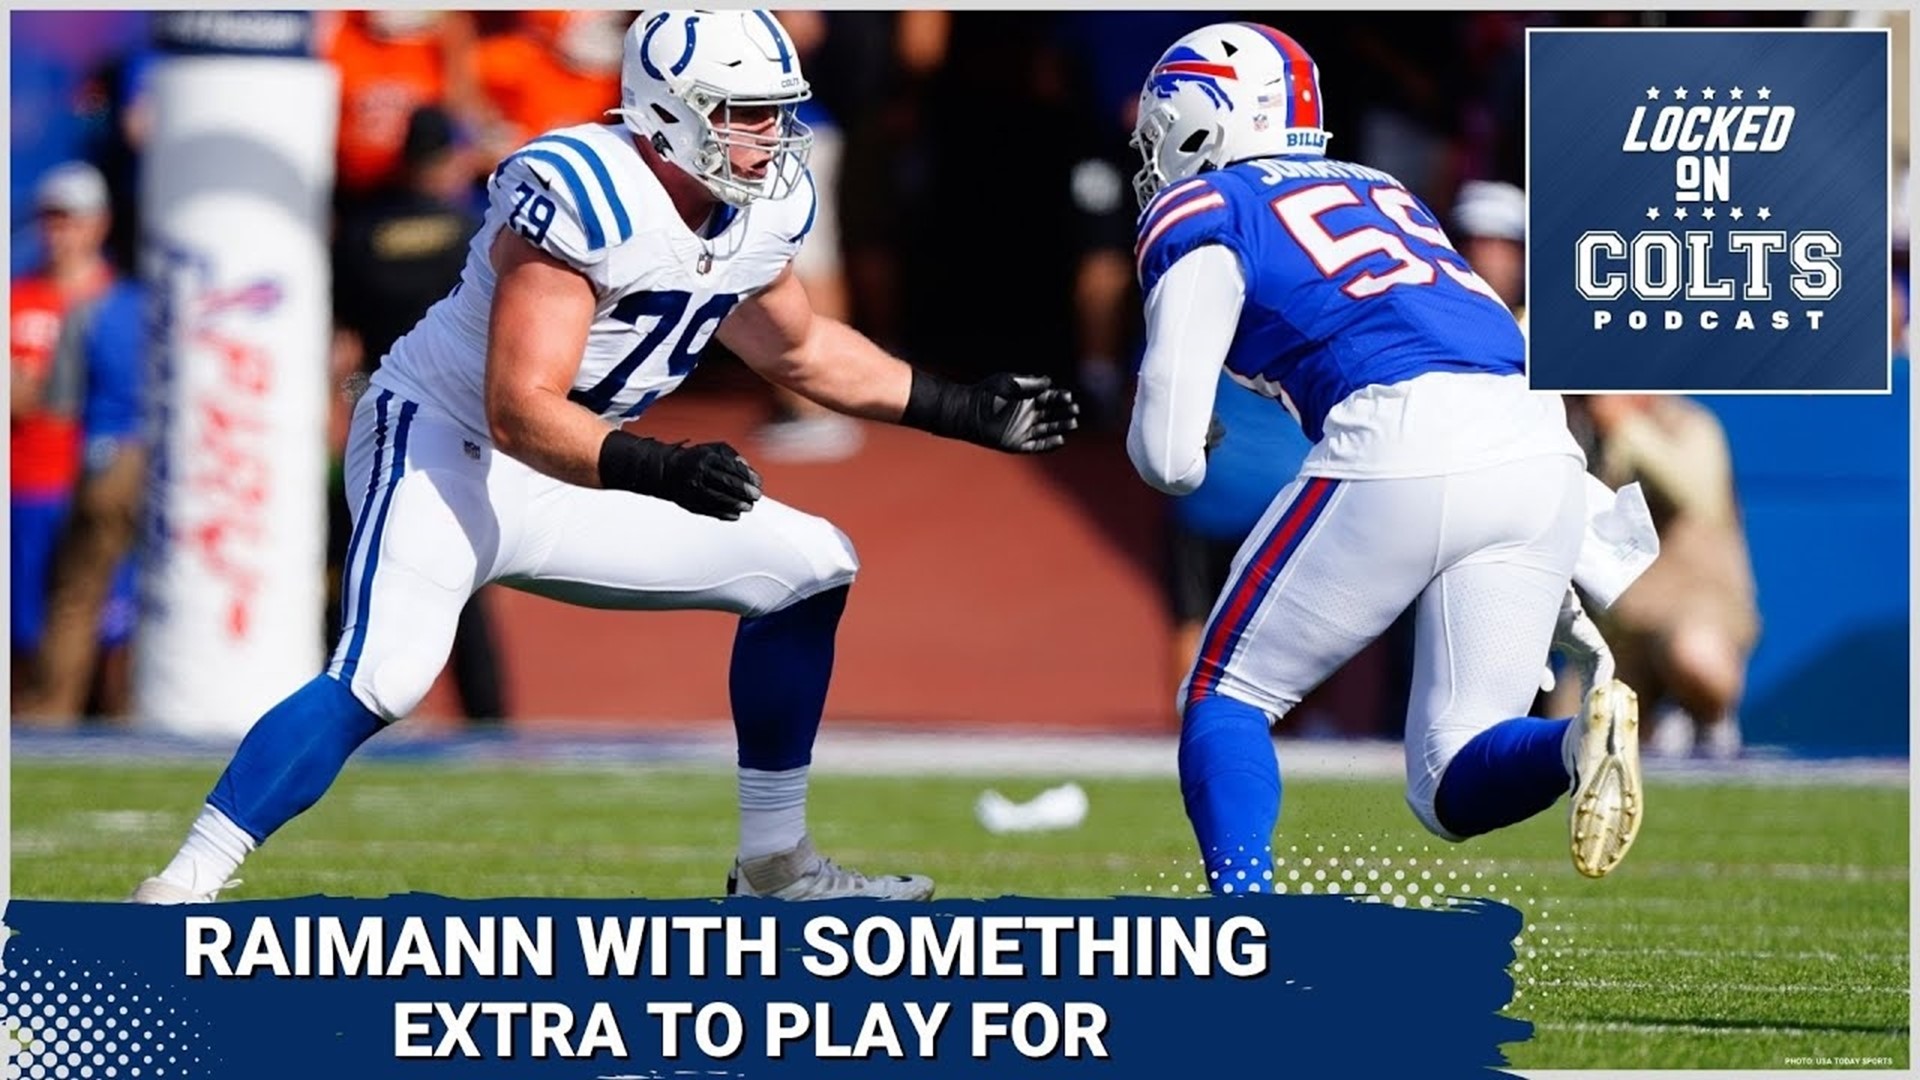 Indianapolis Colts second-year left tackle Bernhard Raimann talks about his excitement about the Colts' upcoming matchup in Germany.